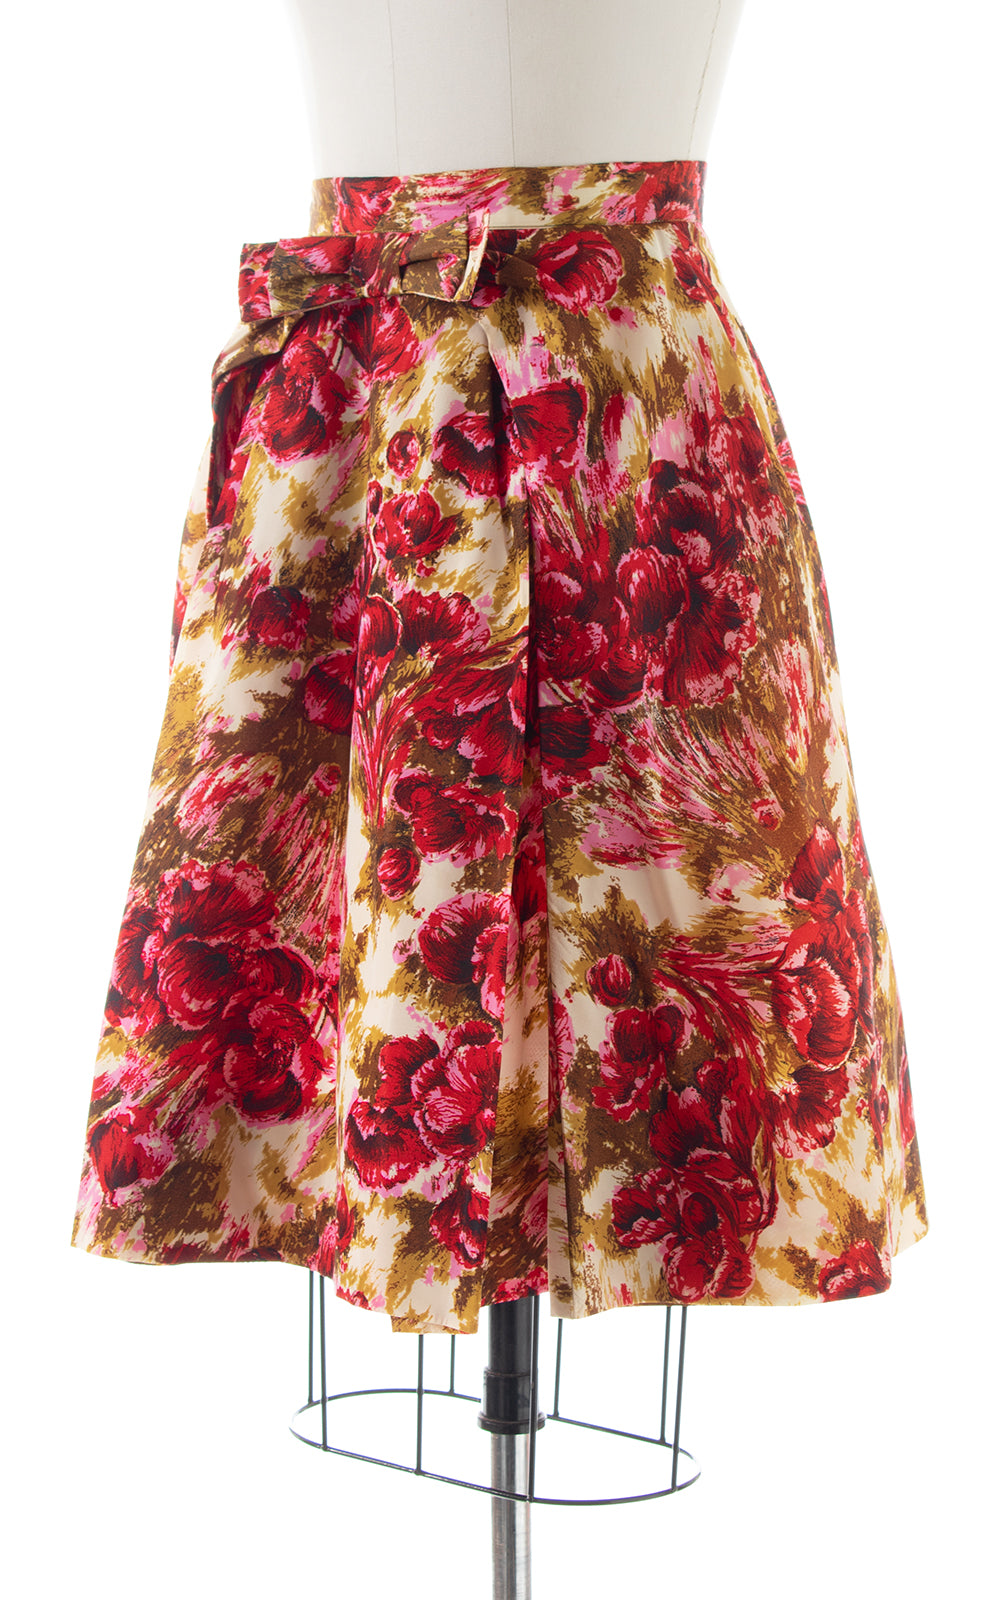 1950s Floral Skirt with Bow BirthdayLifeVintage